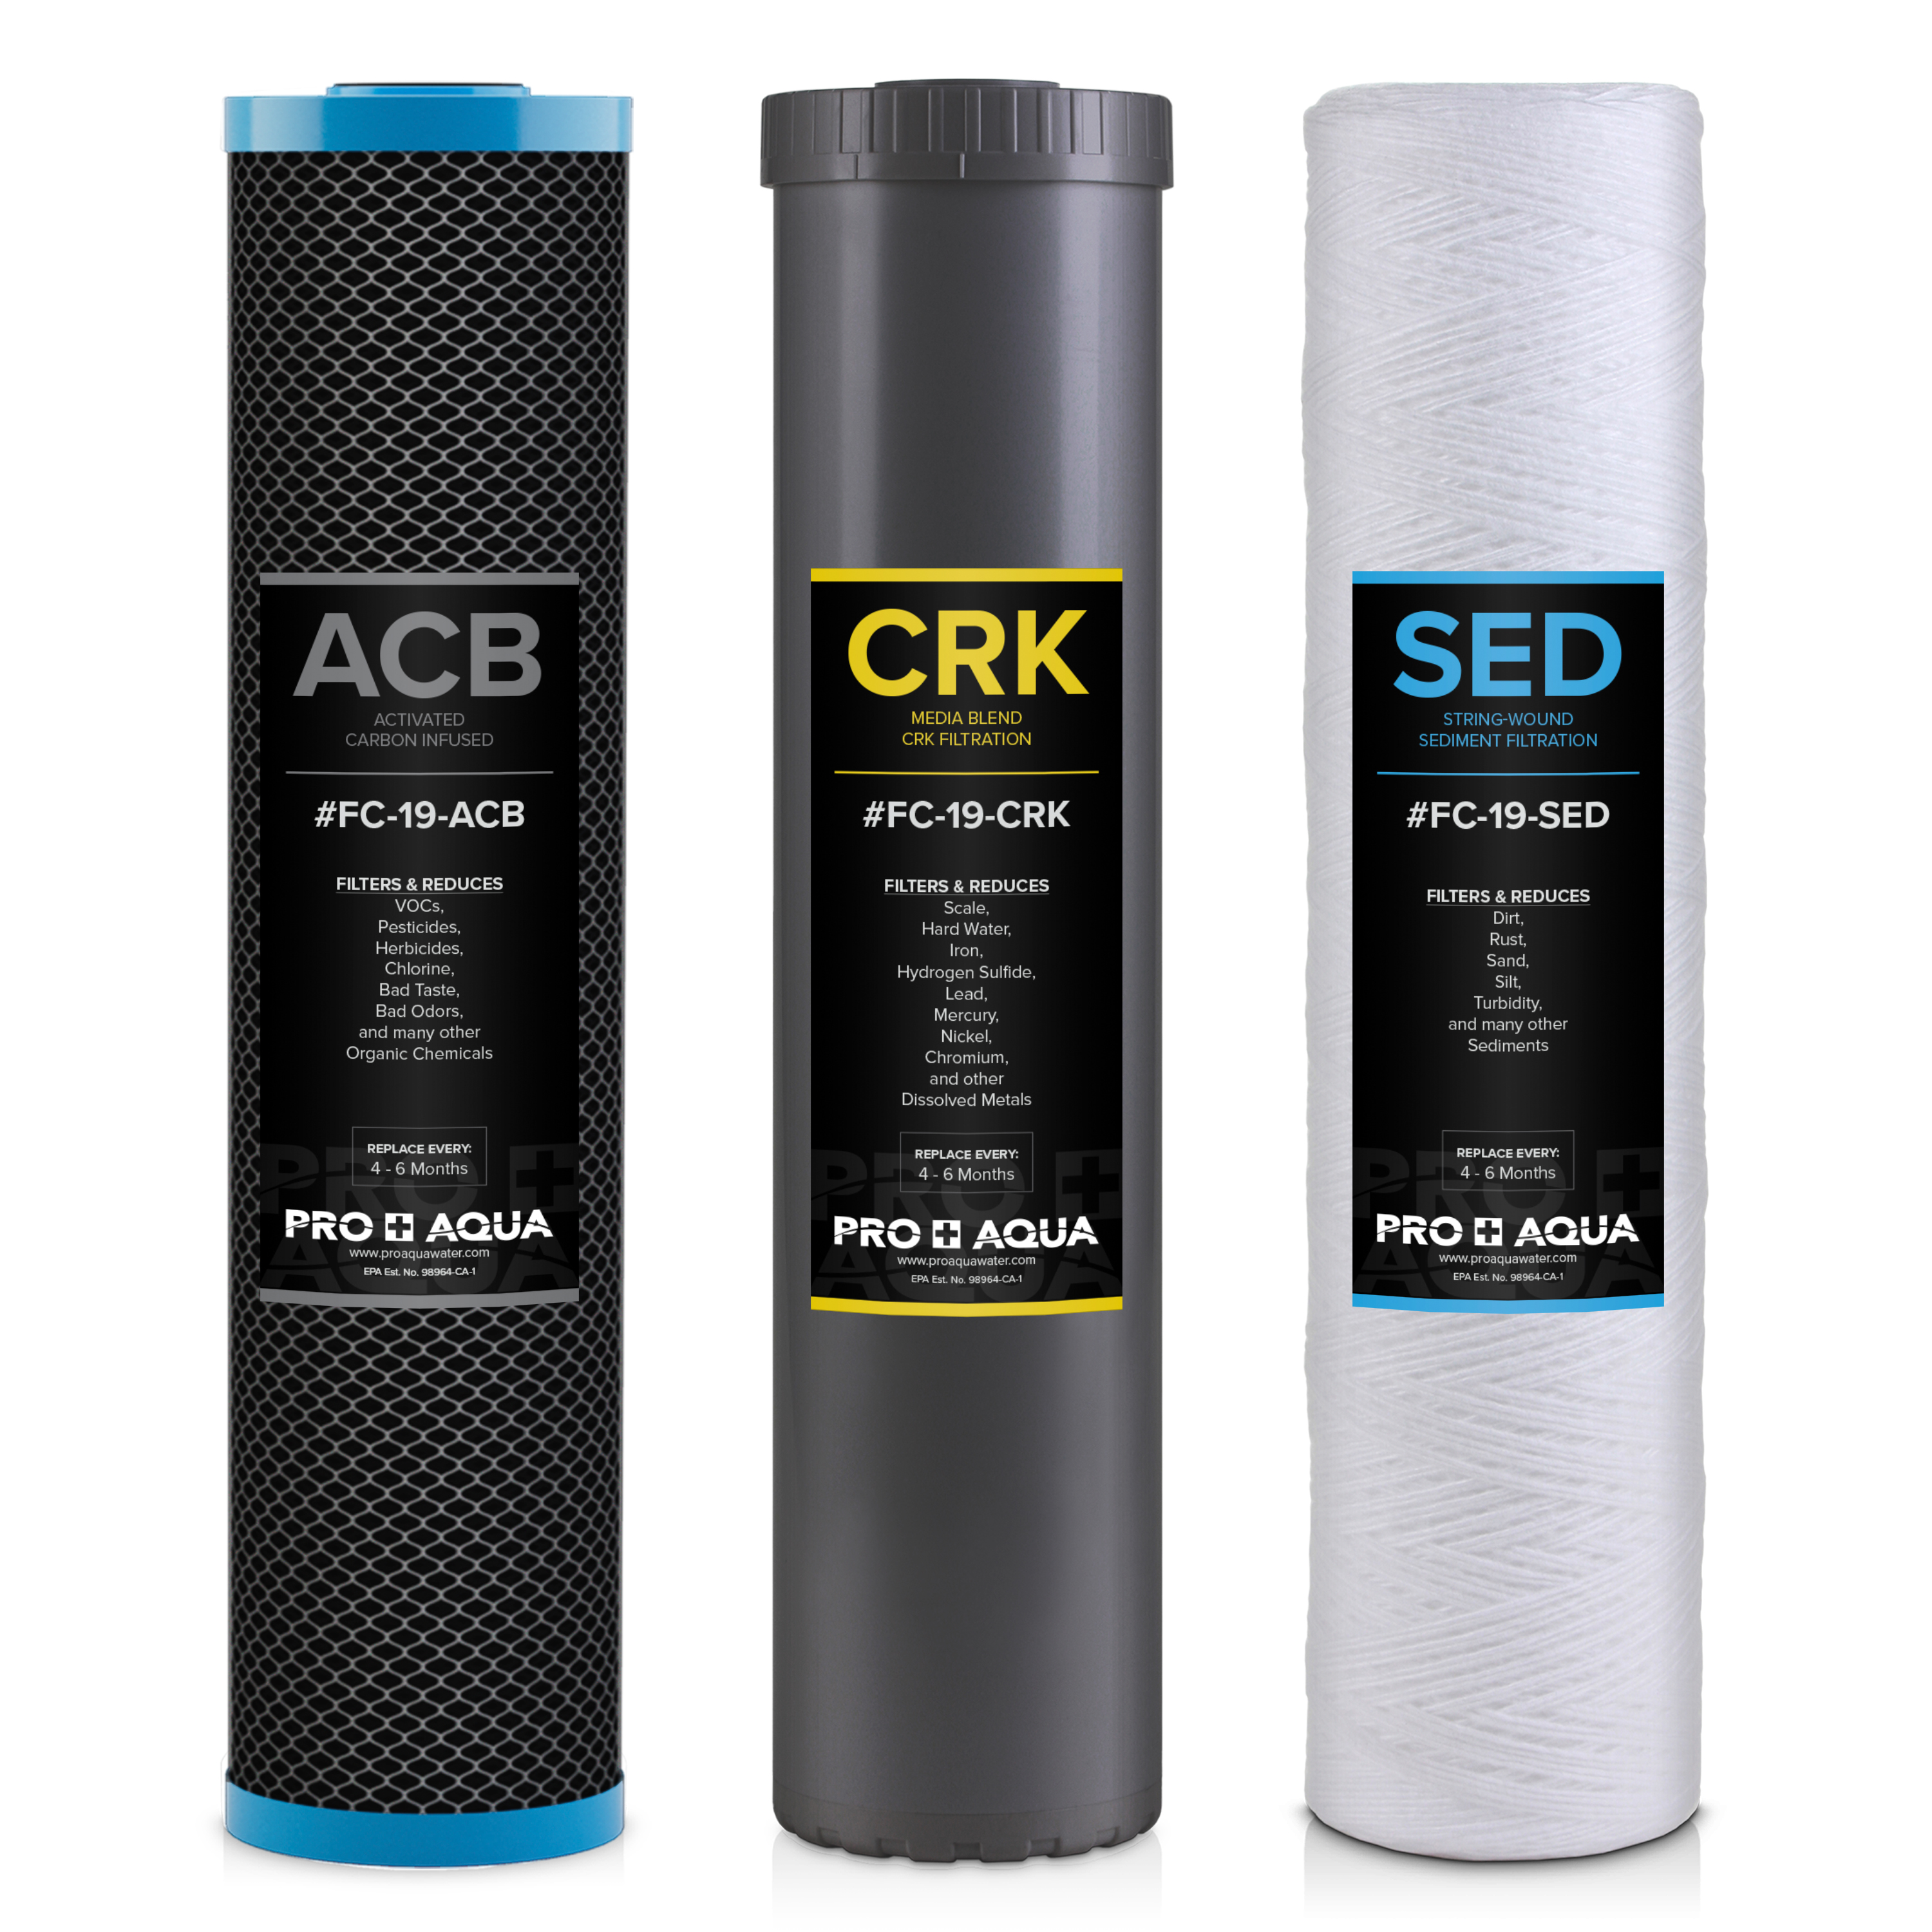 PRO+AQUA ELITE GEN2 Replacement Filter Set, Whole House Heavy Metals Well Water - Sediment, KDF/Blend, Carbon Infused